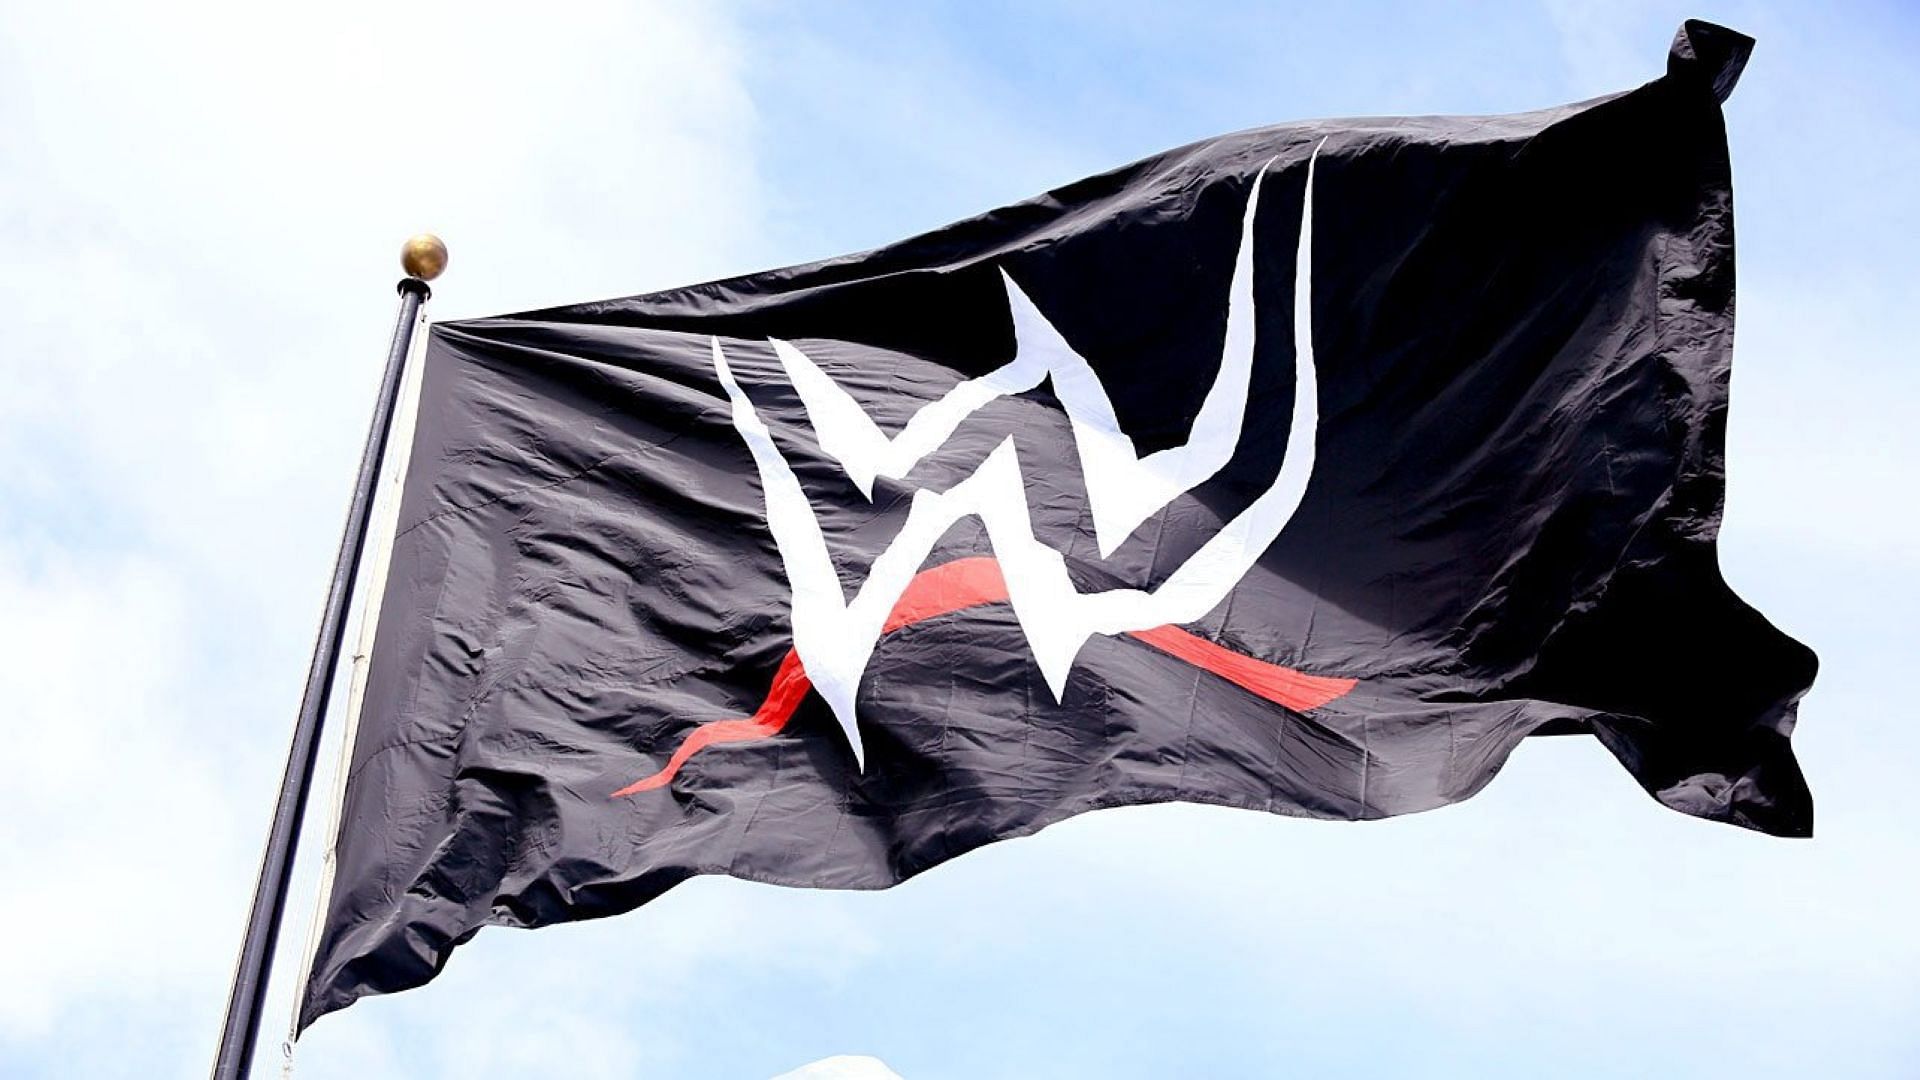 The official WWE logo flag on dispaly